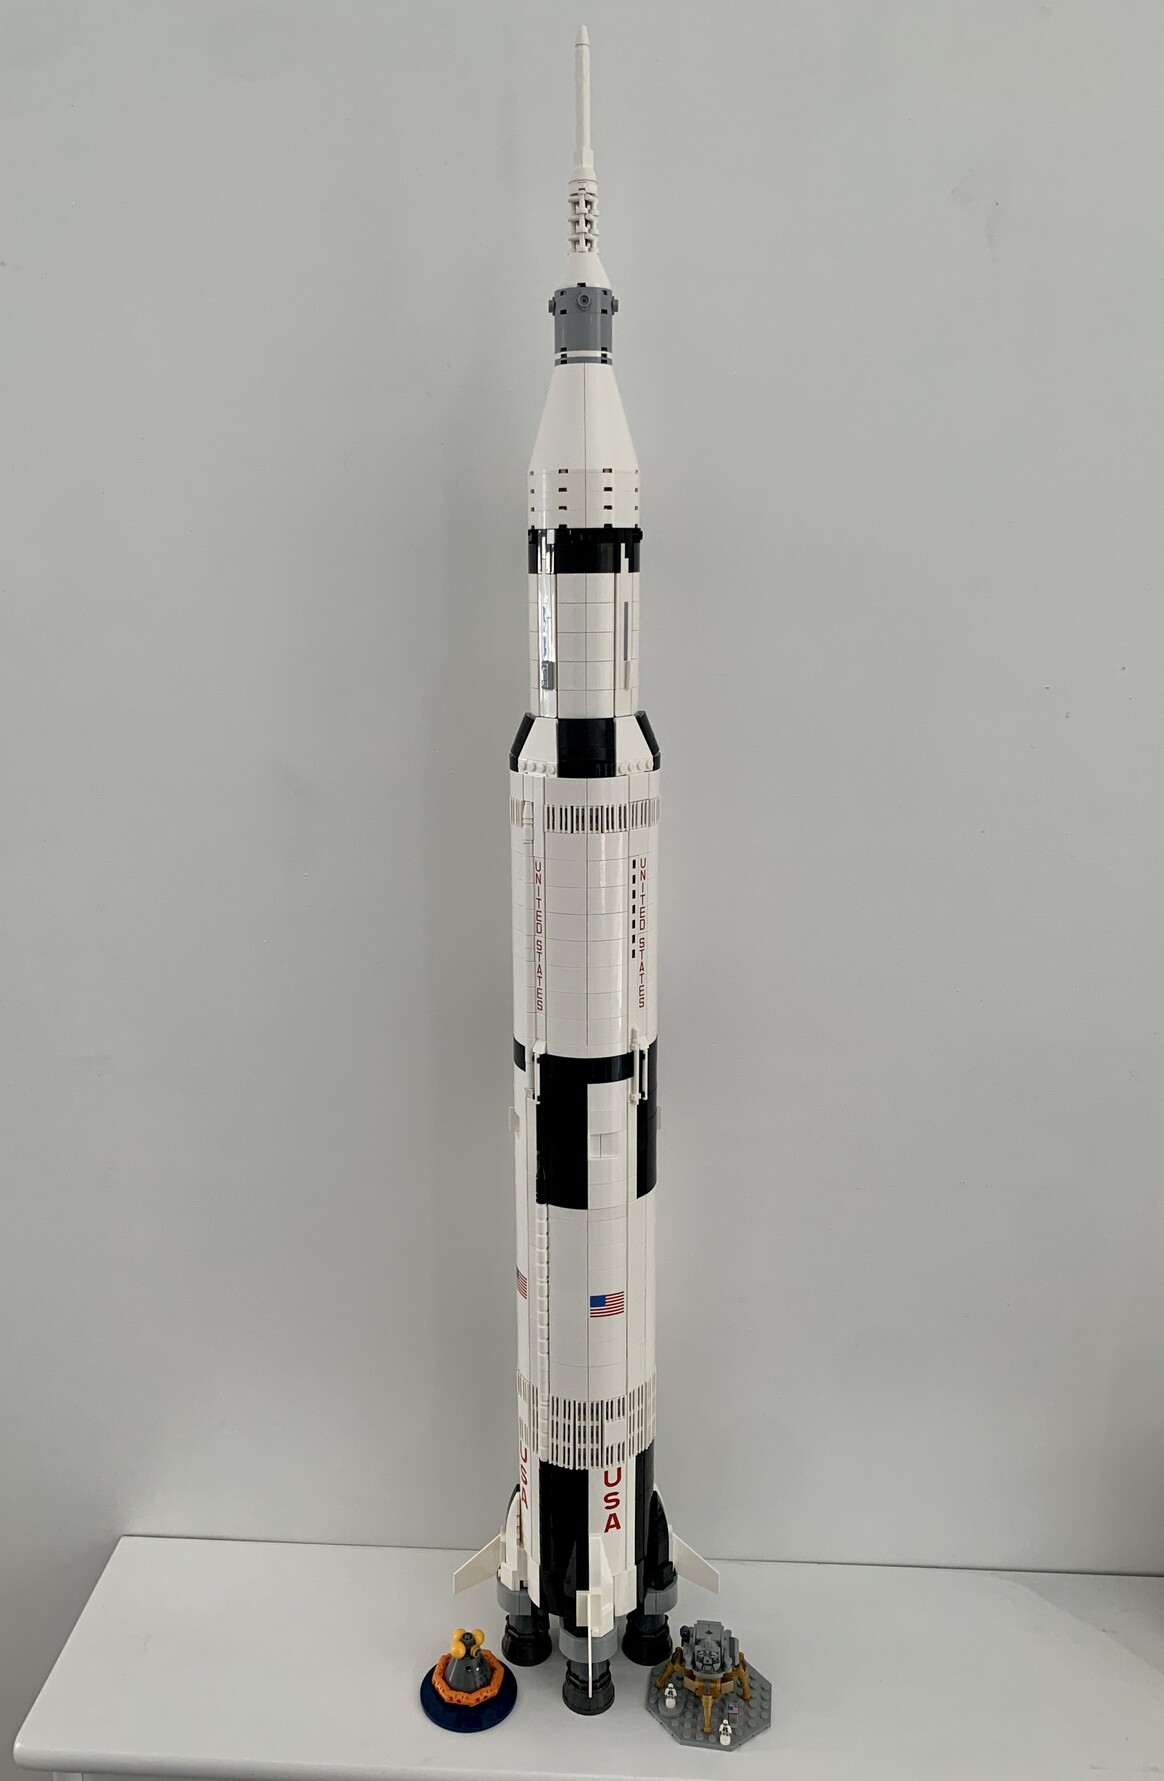 Lego Saturn V rocket standing vertically. To the right of base is a small diorama of the lunar lander one the moon with two astronauts stood in front of it next to a USA flag. To the left of the base is another diorama of the command module floating in the ocean with flotation equipment inflated.